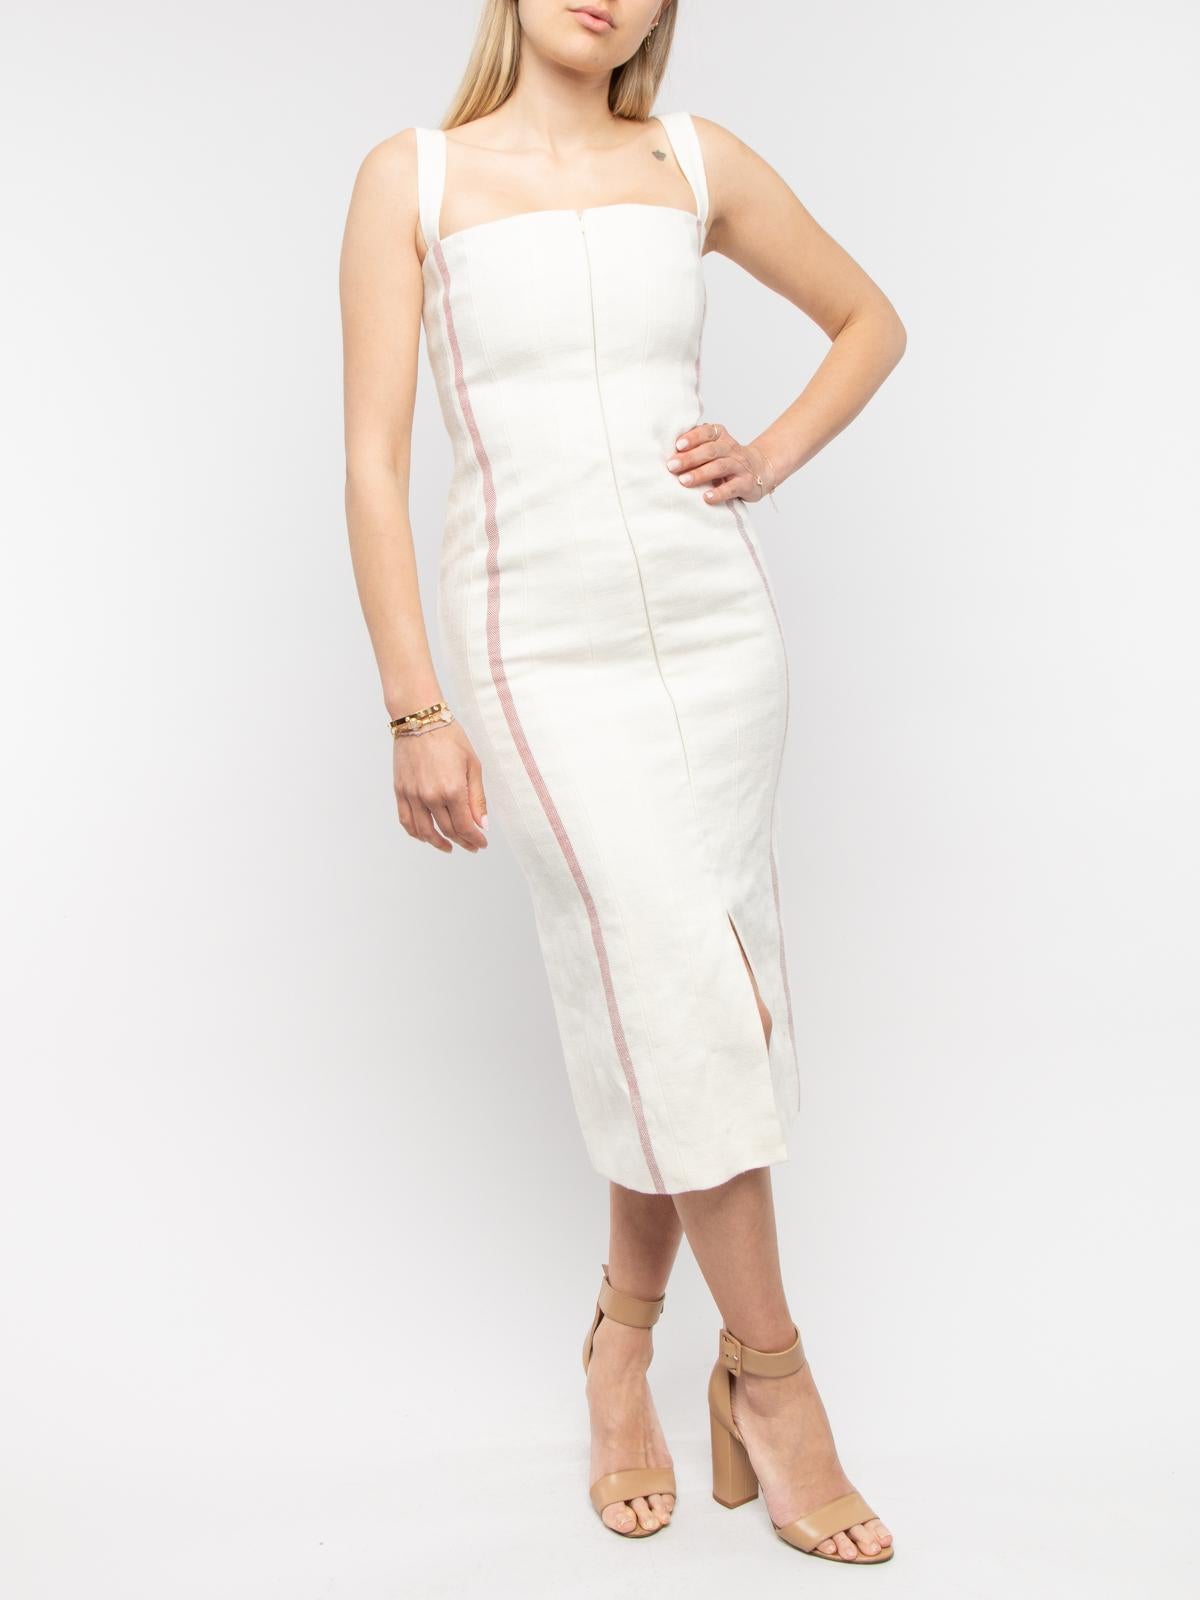 brock collection white dress